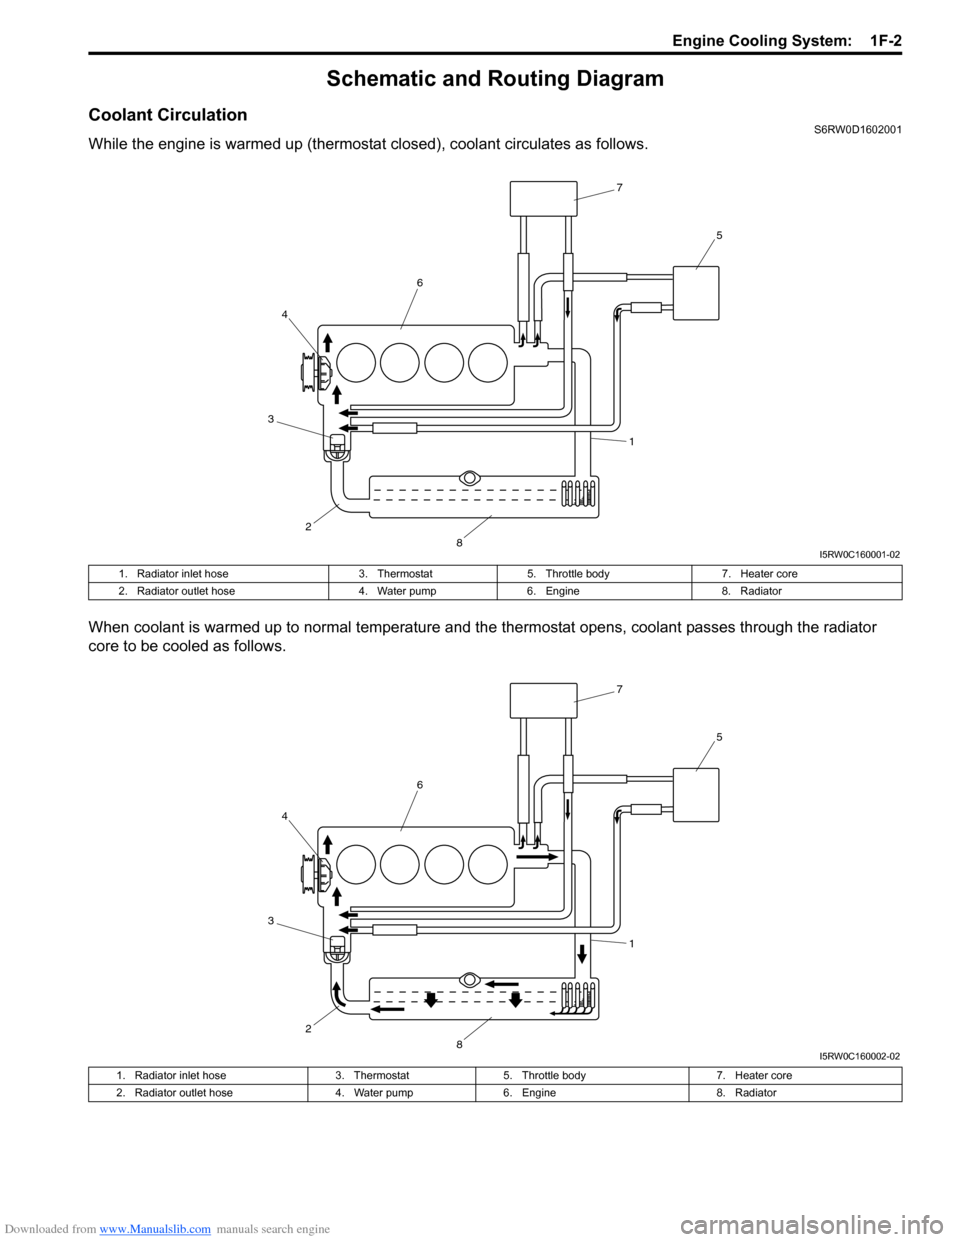 SUZUKI SX4 2006 1.G Service Workshop Manual Downloaded from www.Manualslib.com manuals search engine Engine Cooling System:  1F-2
Schematic and Routing Diagram
Coolant CirculationS6RW0D1602001
While the engine is warmed up (thermostat closed), 